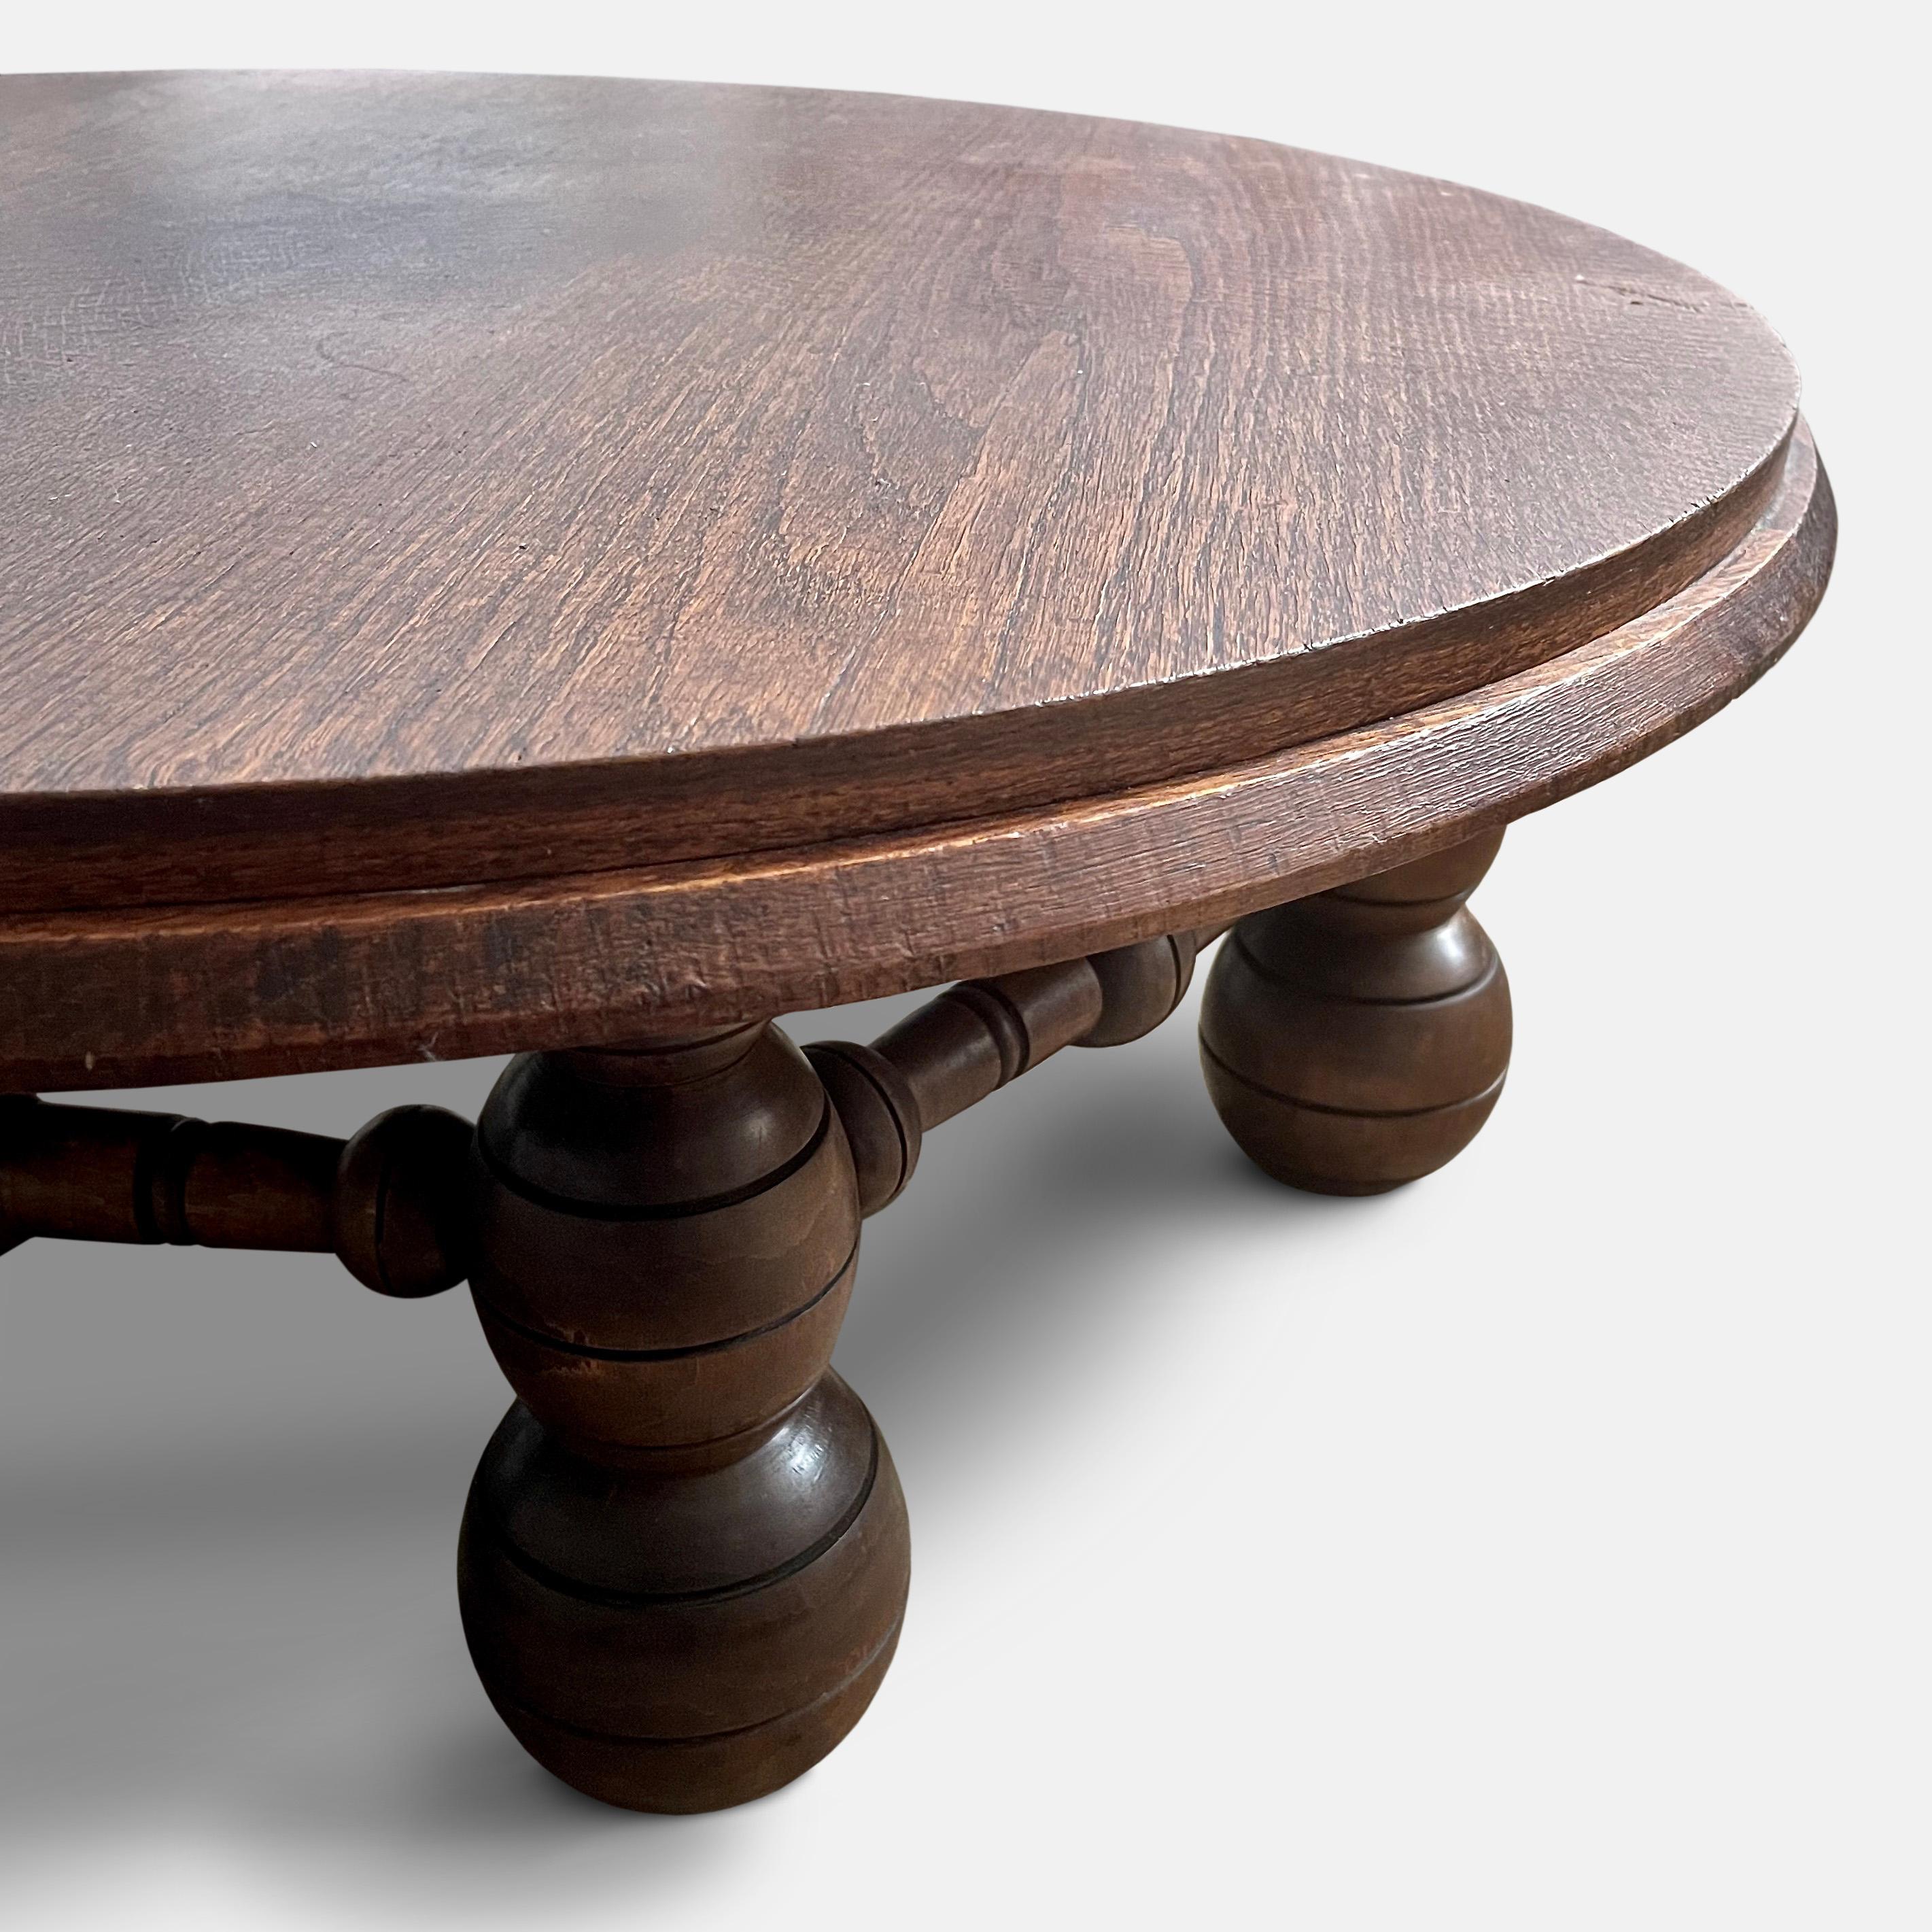 A large oak coffee table by Charles Dudouyt, circa 1940.
Known for his unique style that blended traditional French craftsmanship with modernist forms, Duduoyt's designs are characterised by clean lines, geometric shapes and use of natural